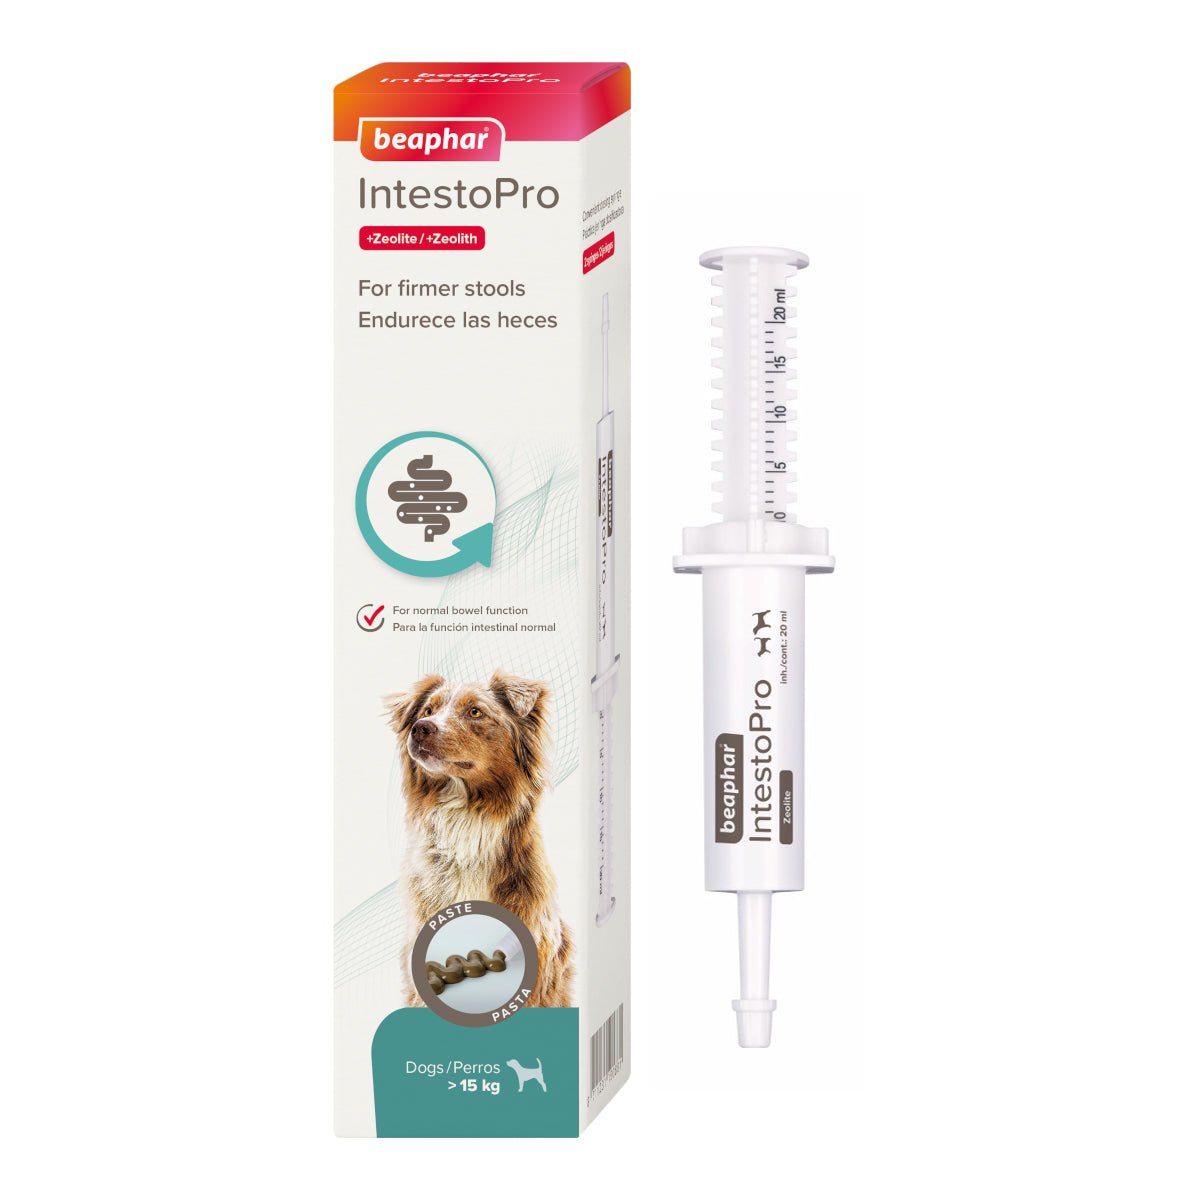 Beaphar IntestoPro Paste 40ml Digestion Relief for Dogs